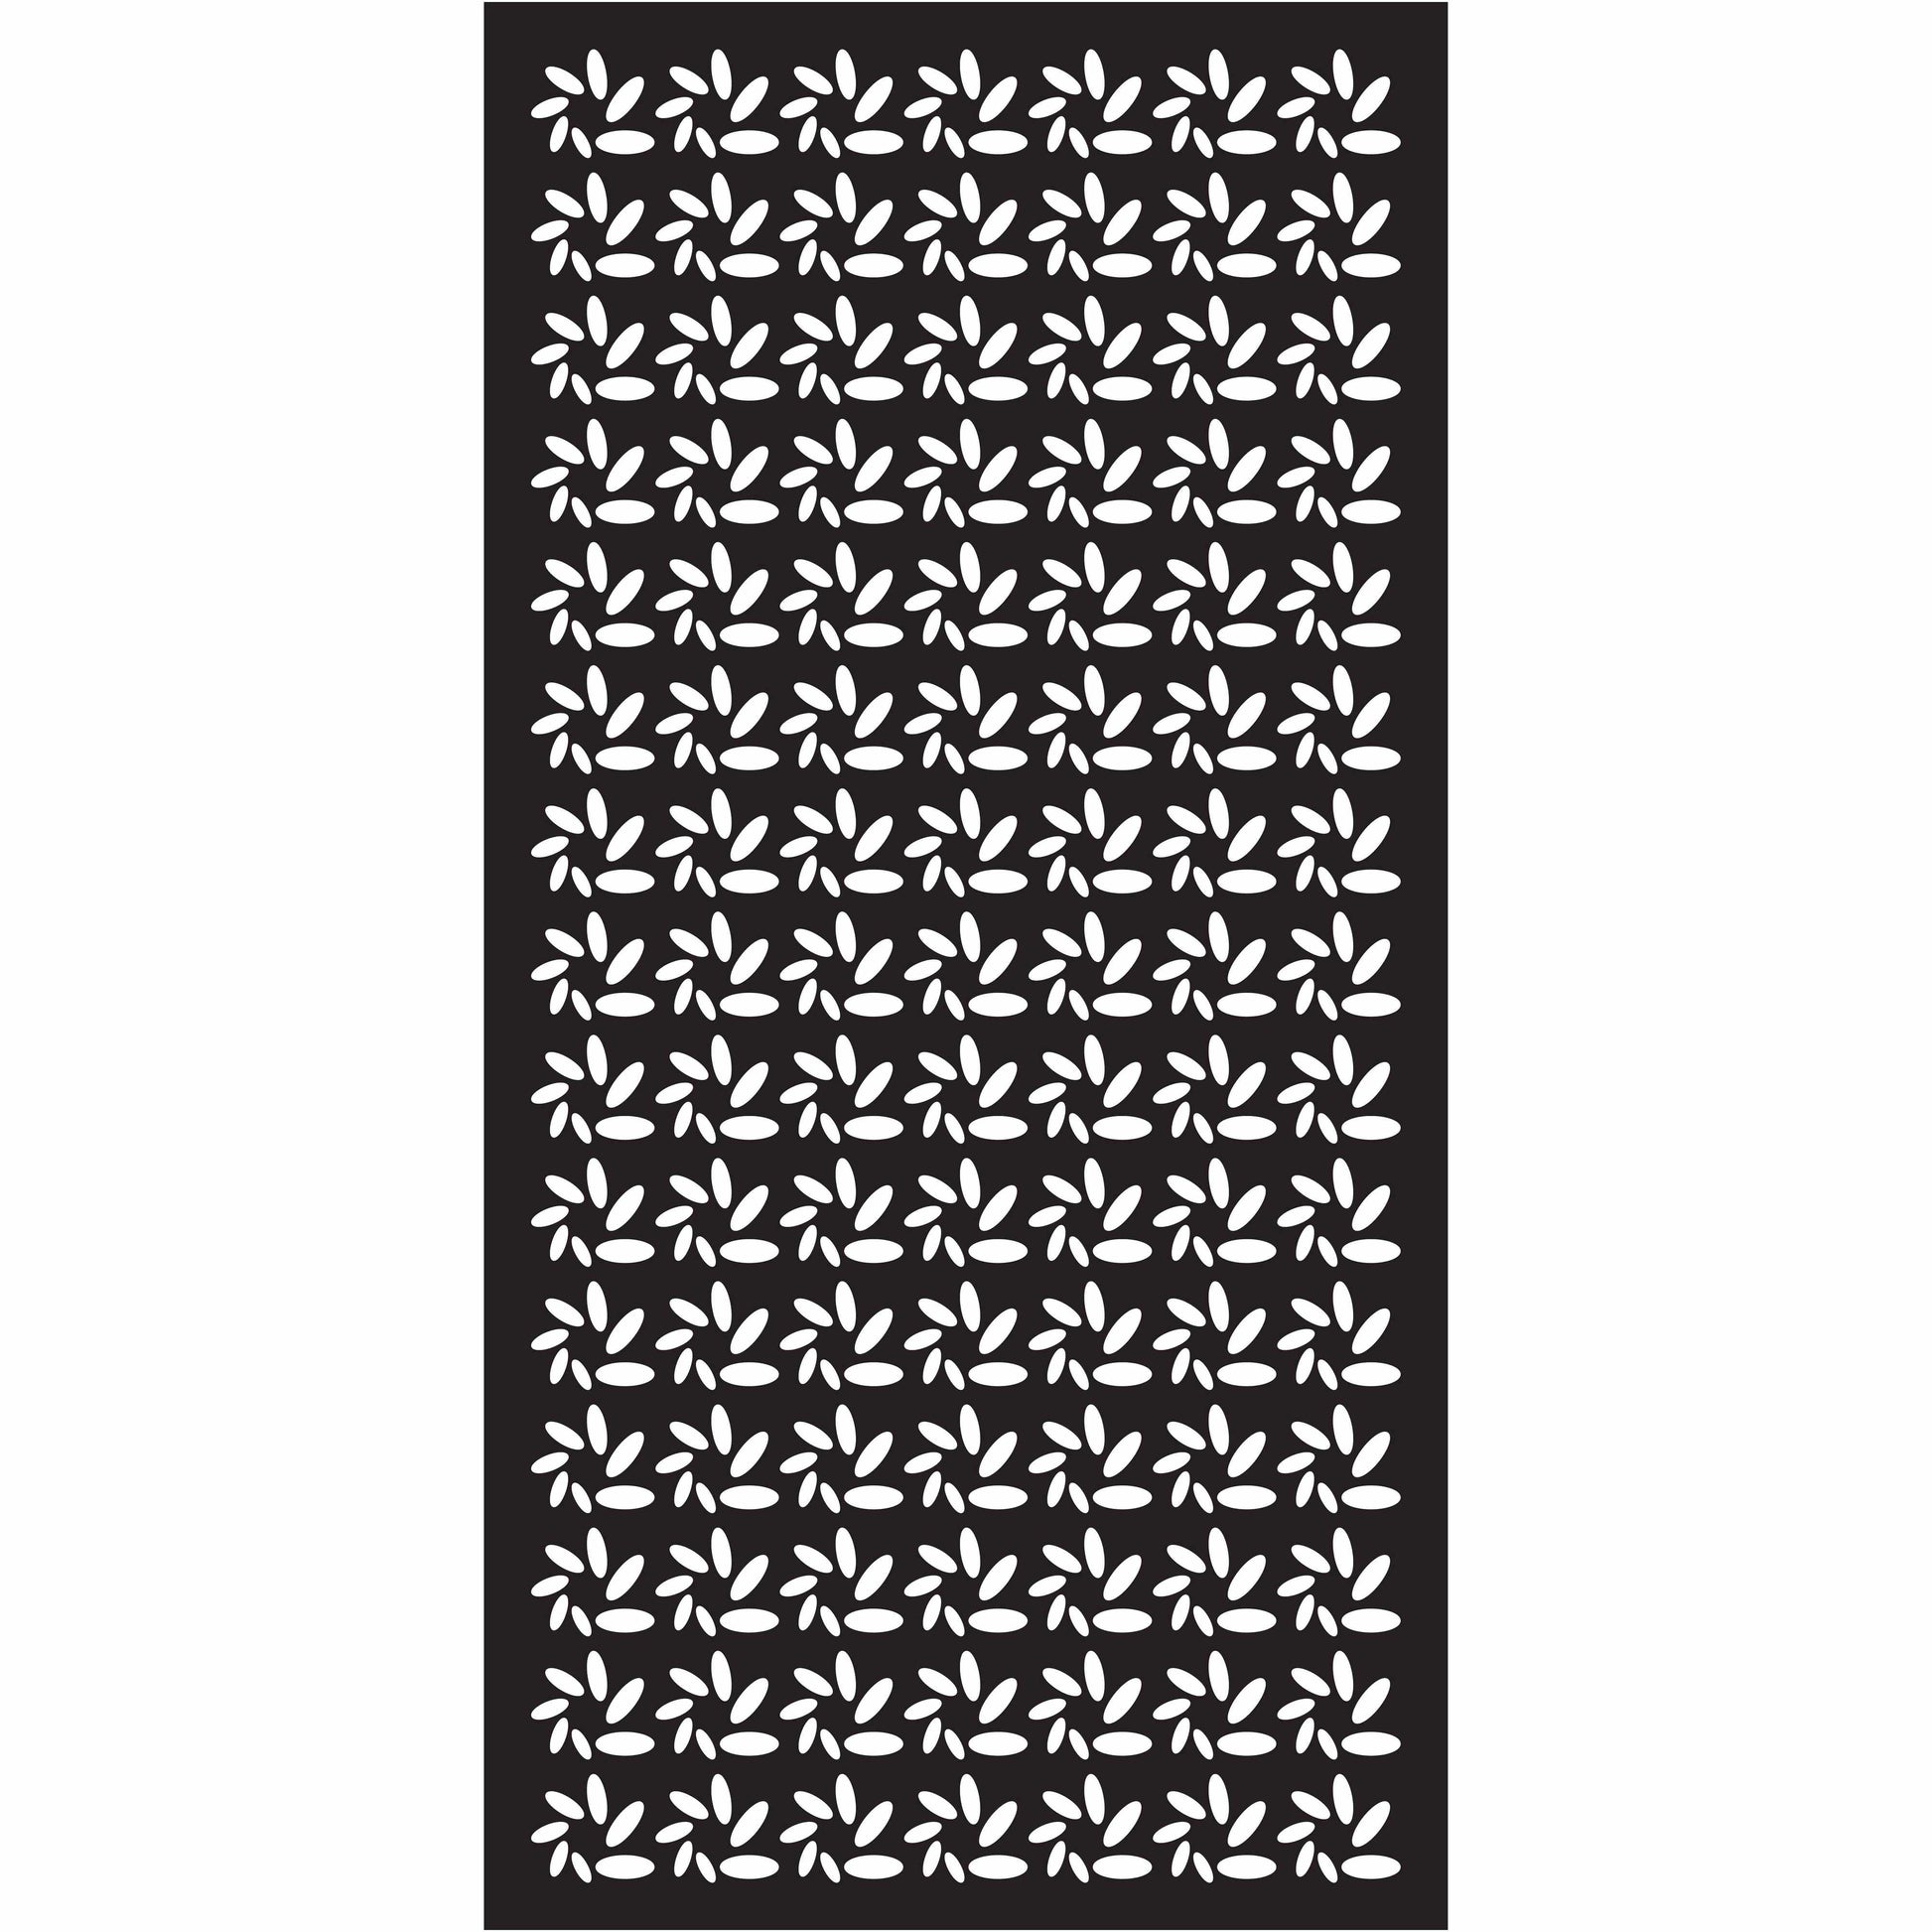 Abstract and Floral Decorative Privacy Screen Panels Doors or Fence-Free DXF files Cut Ready CNC Designs